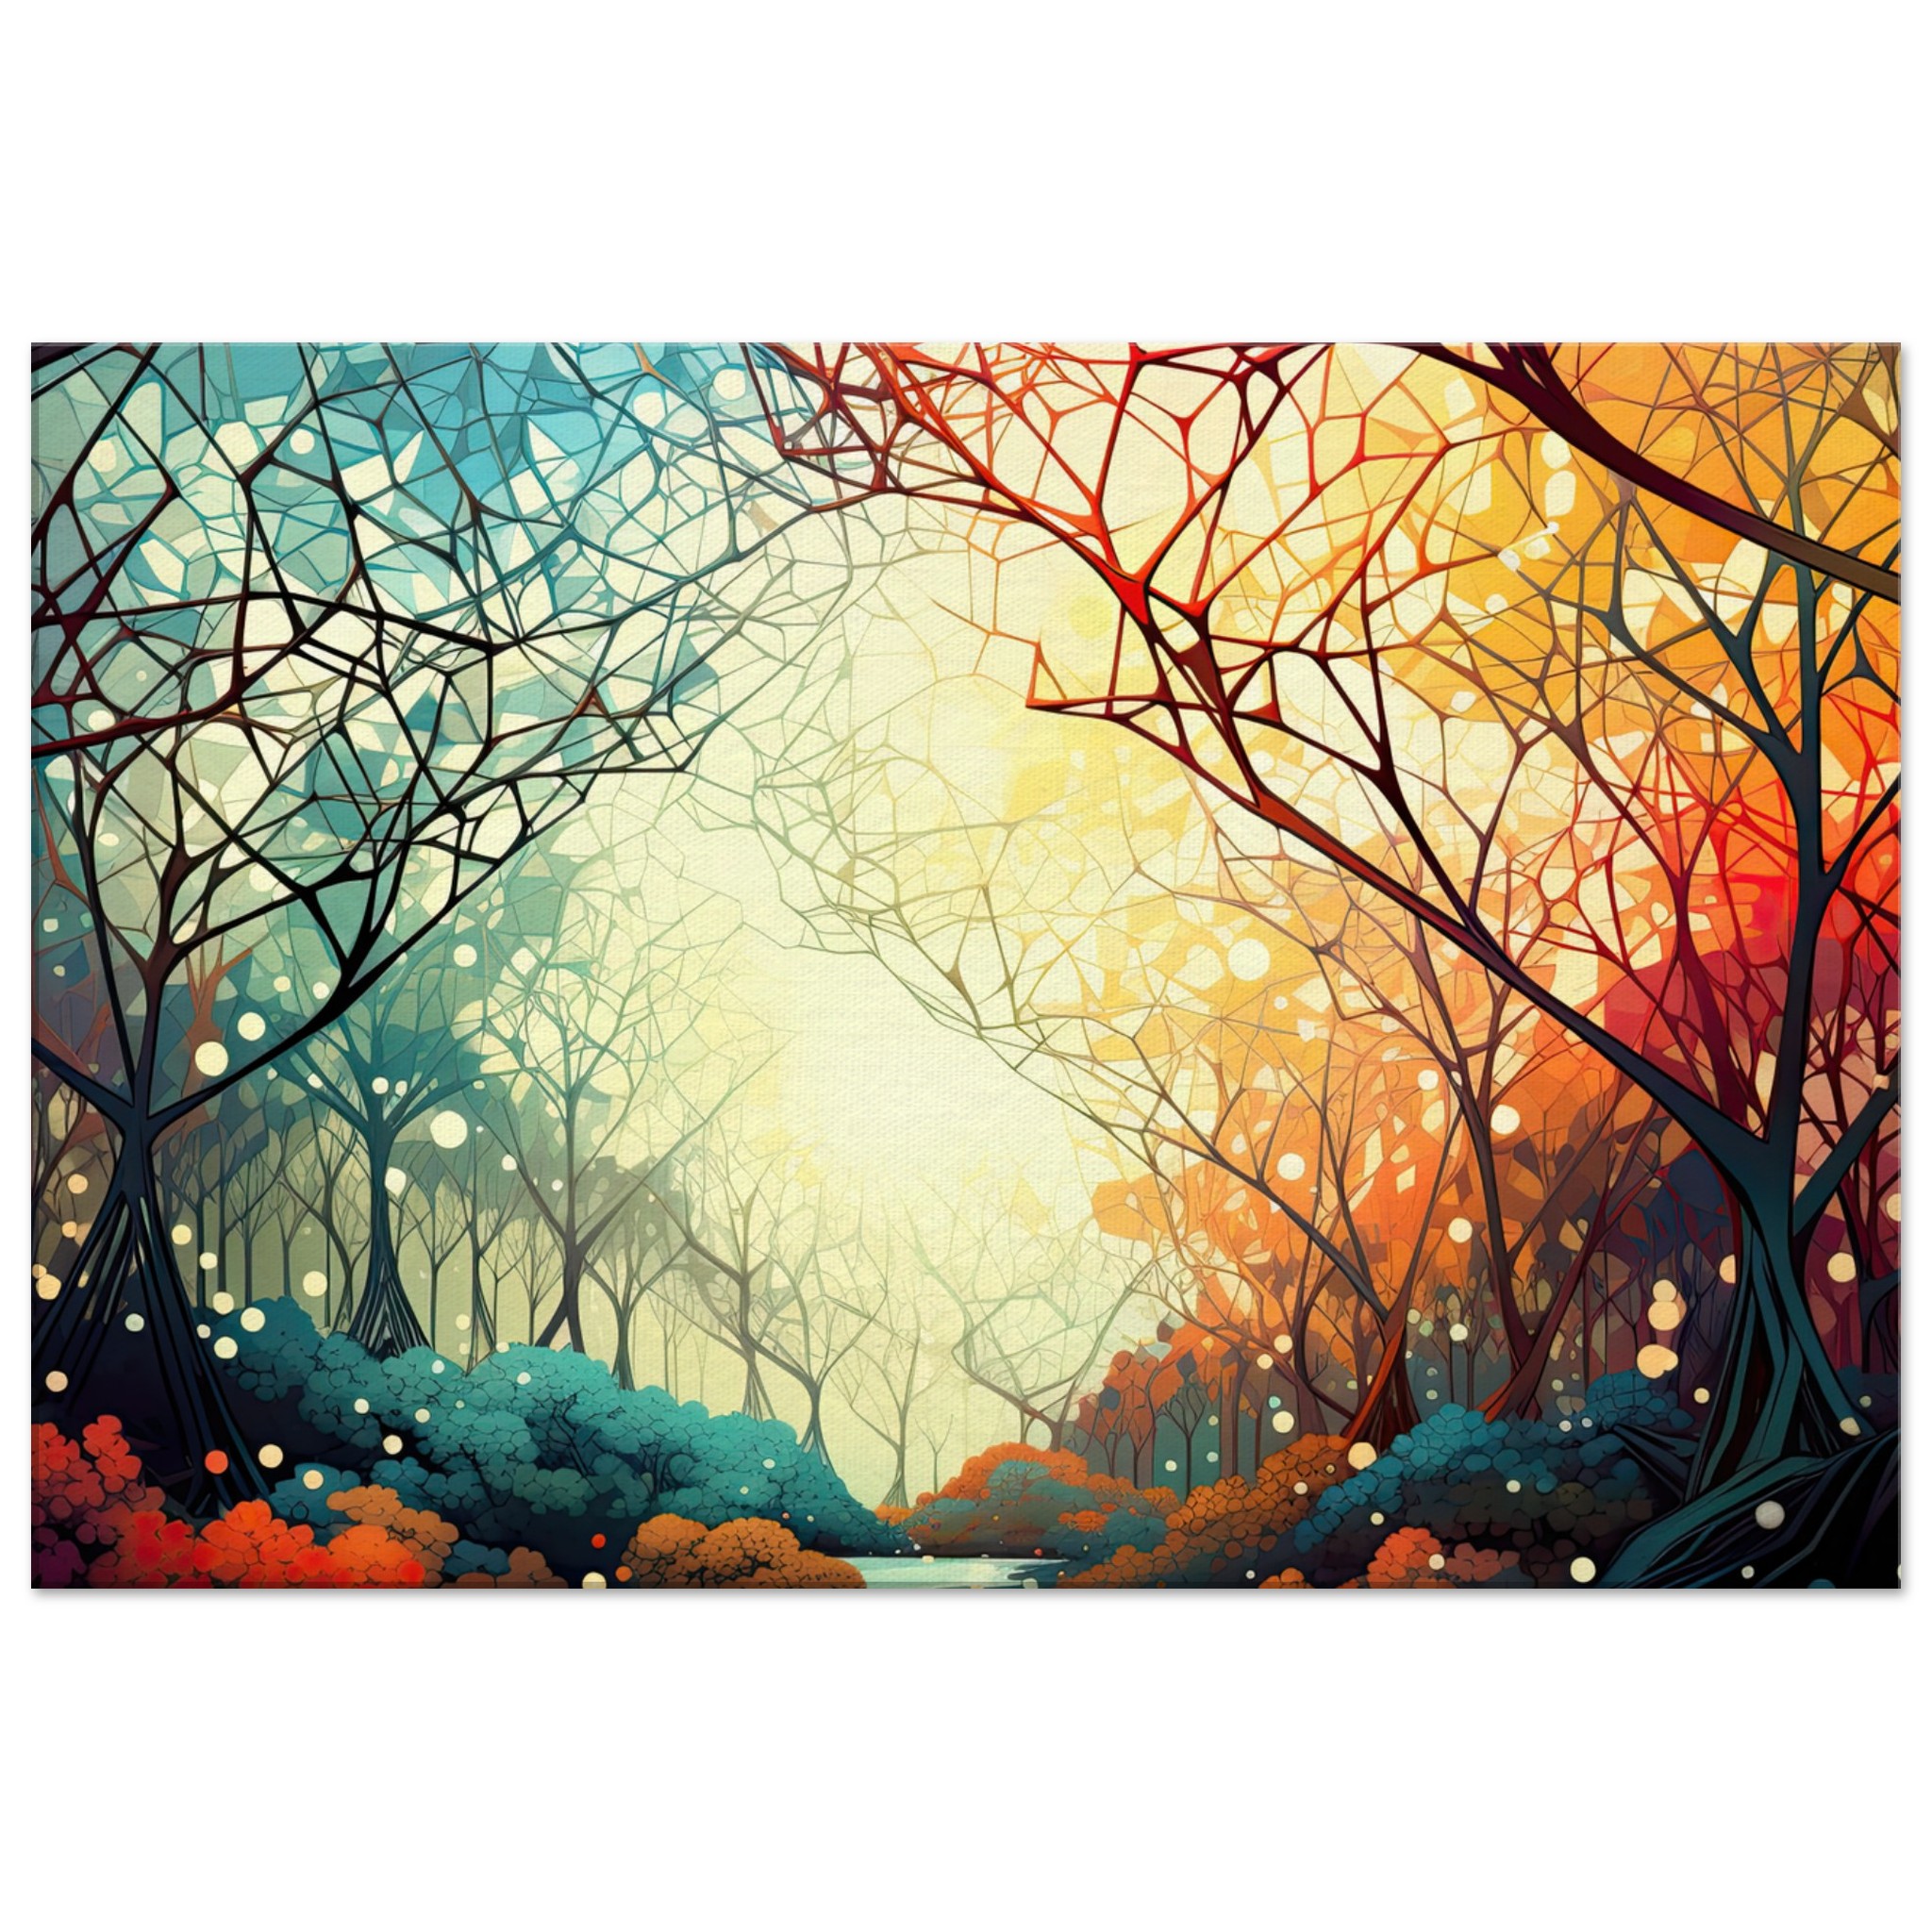 Forest Colorful Abstract Landscape Canvas Print